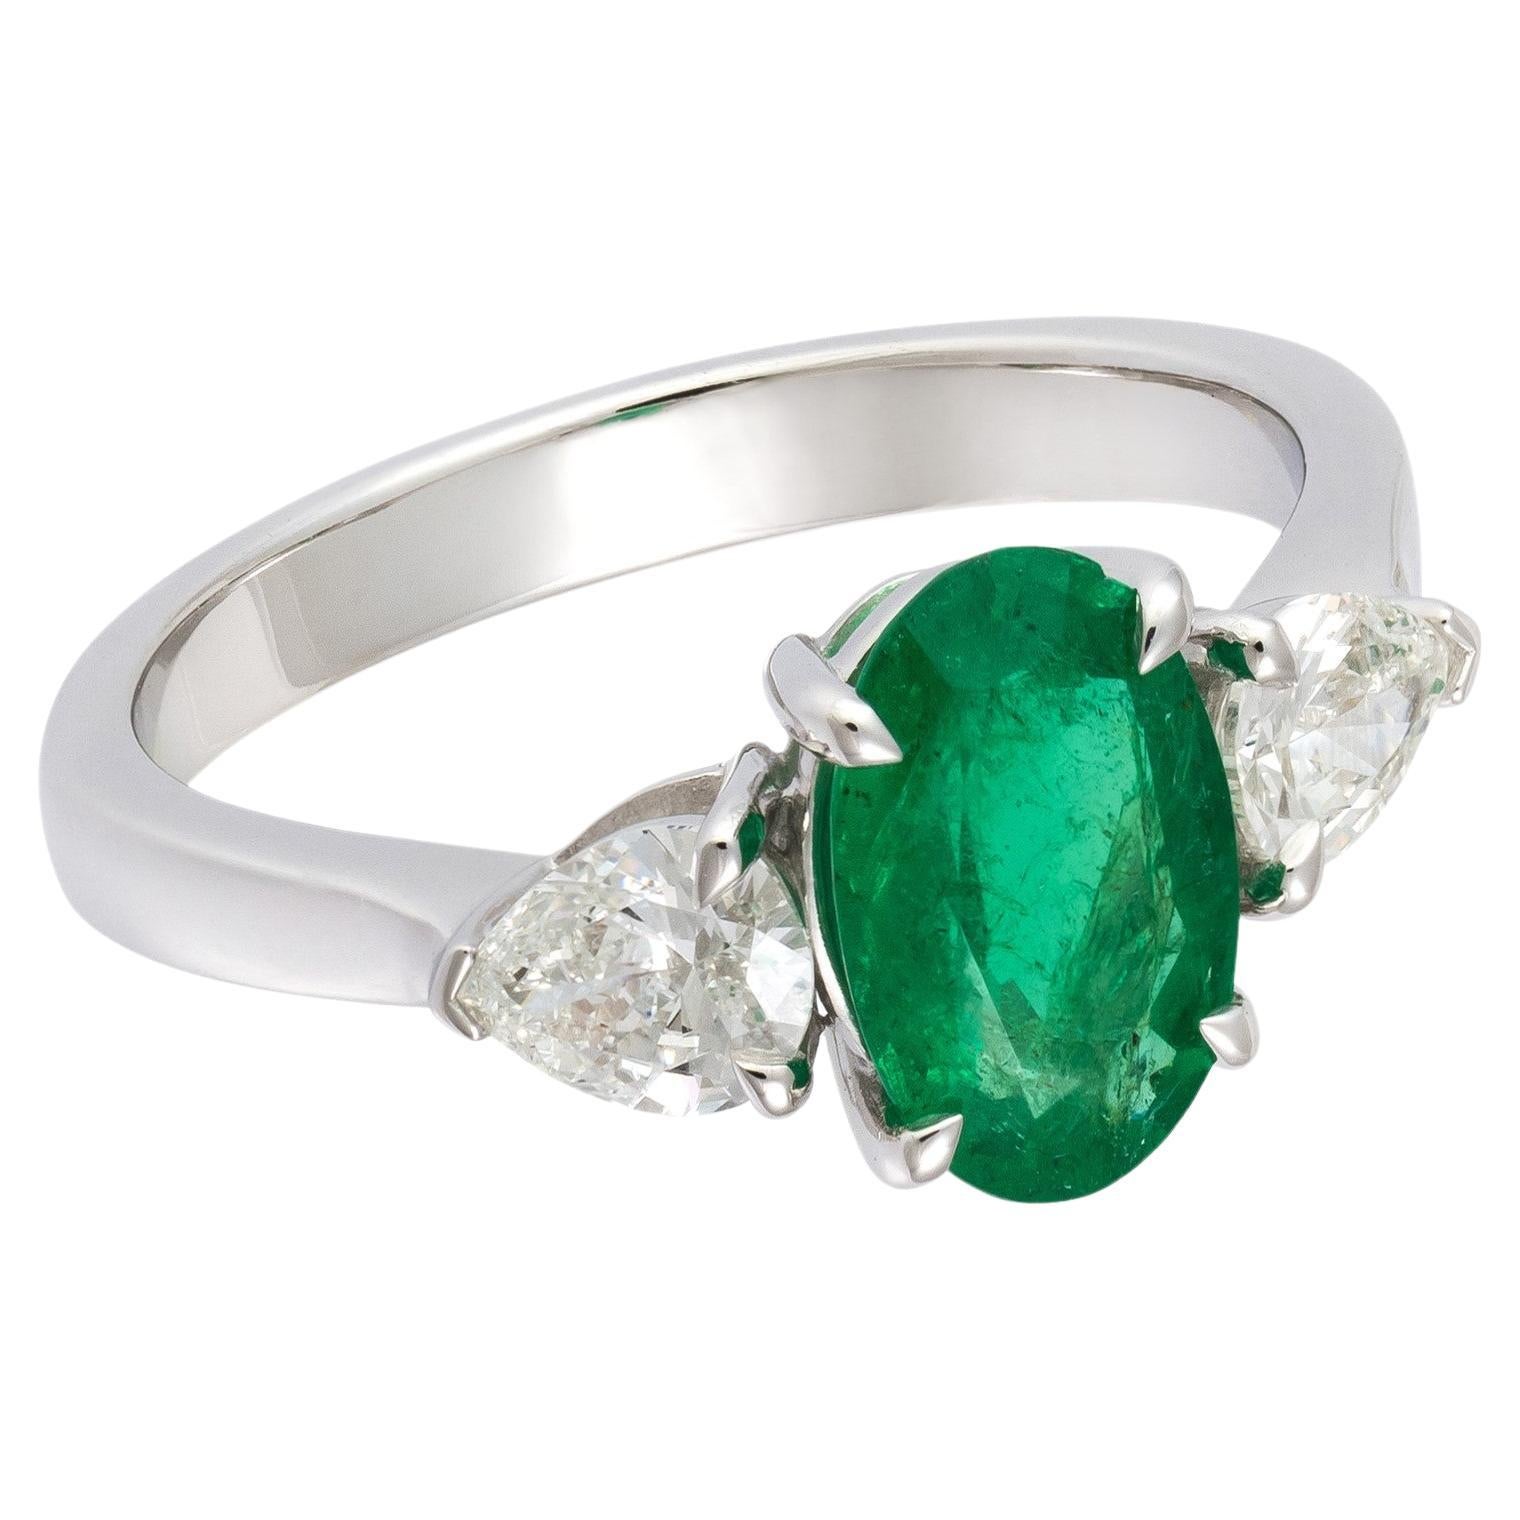 NWT $5, 500 Or 18KT Large Gorgeous Fancy Oval Emerald and Diamond Ring